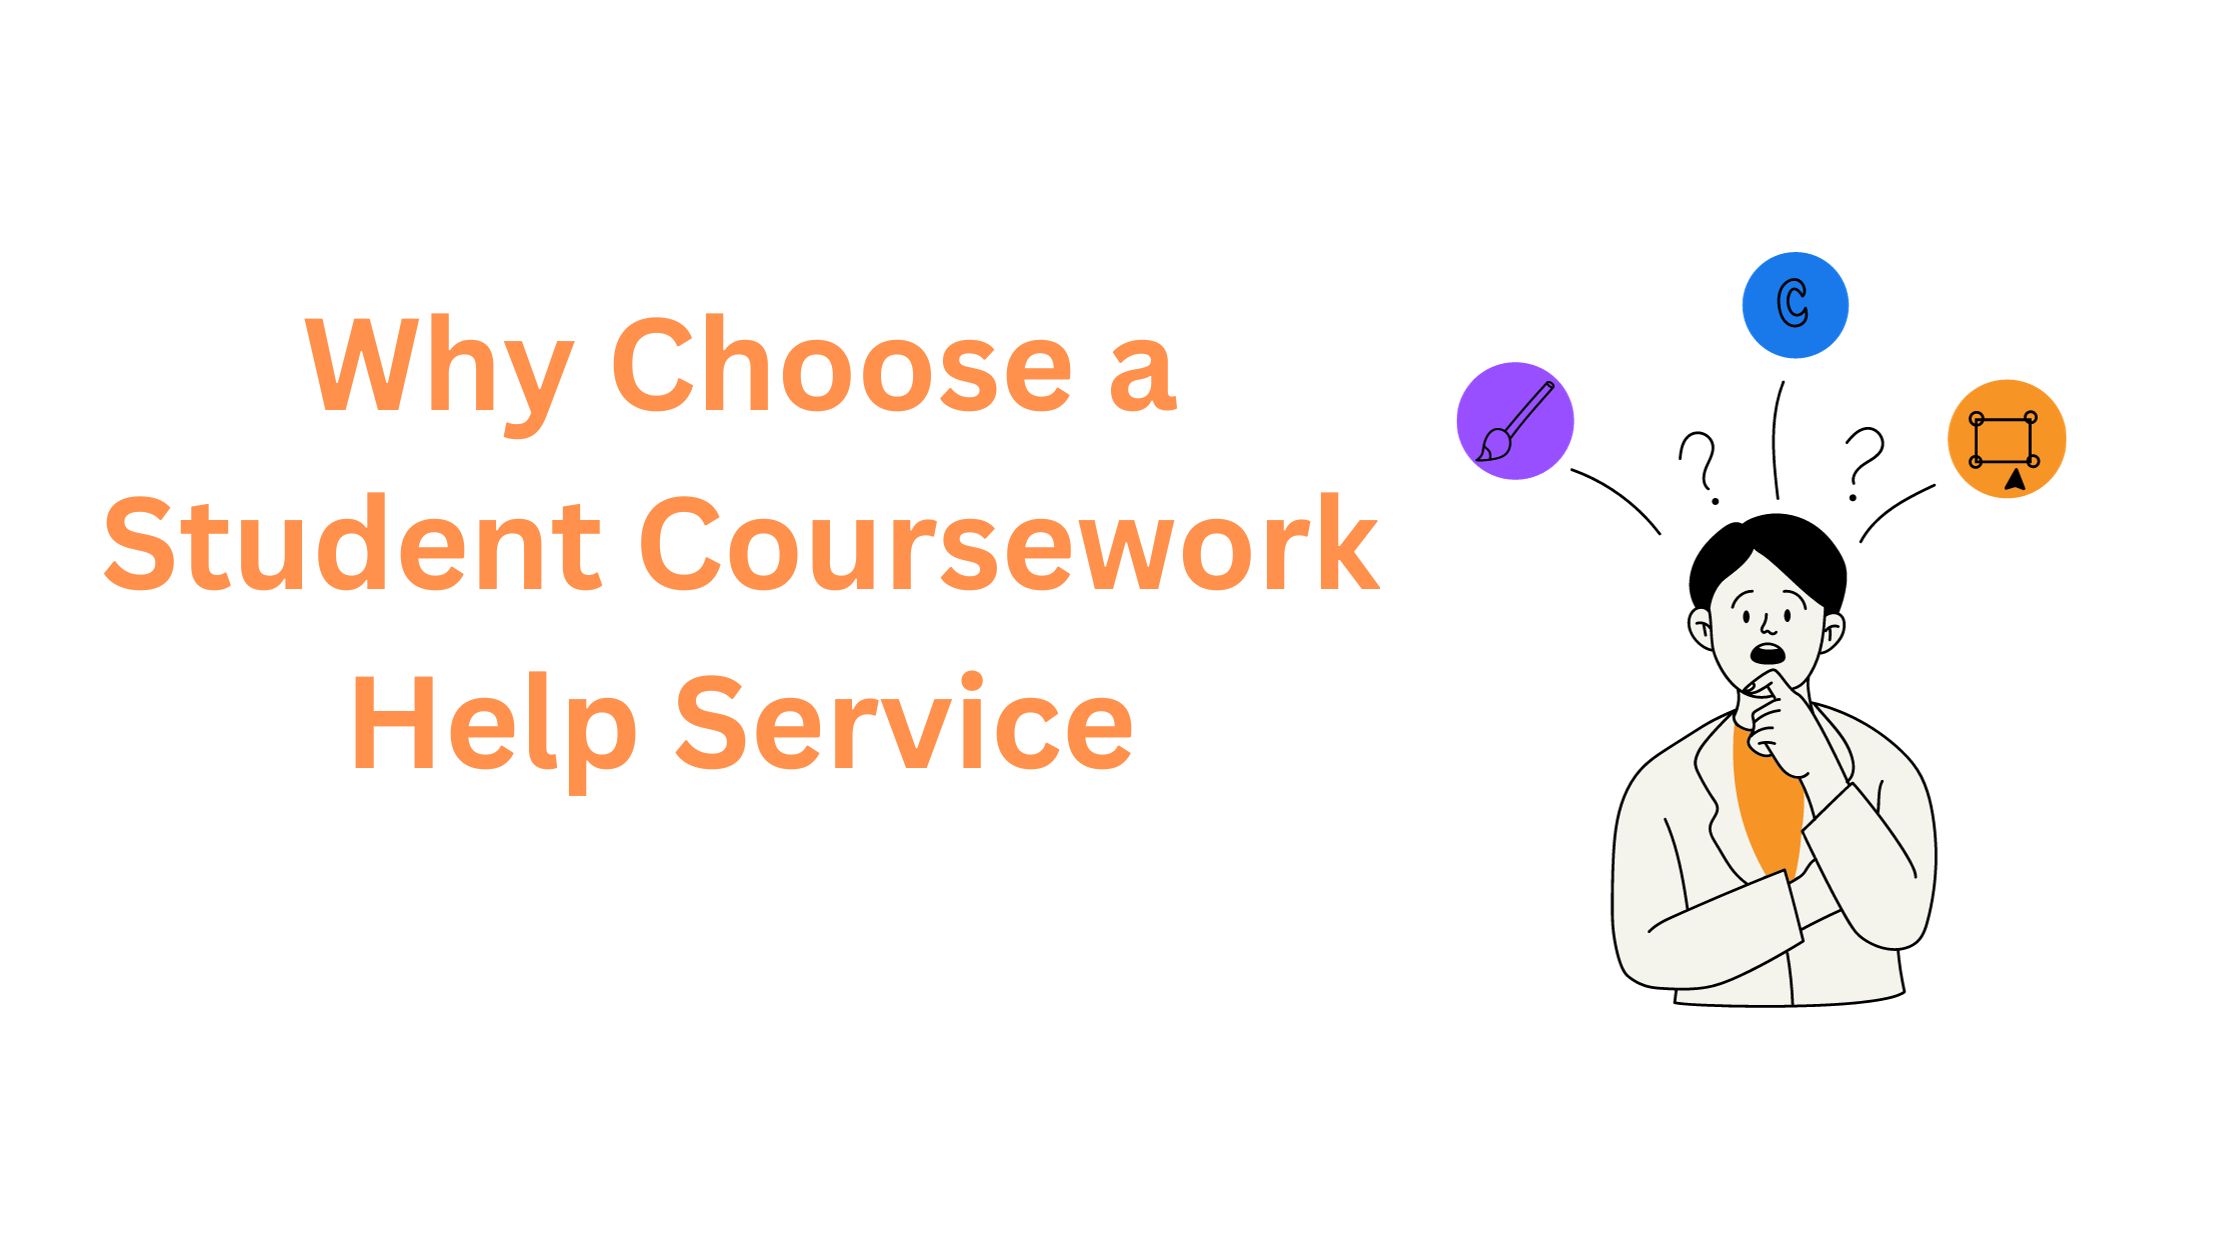 Why choose a student coursework help service